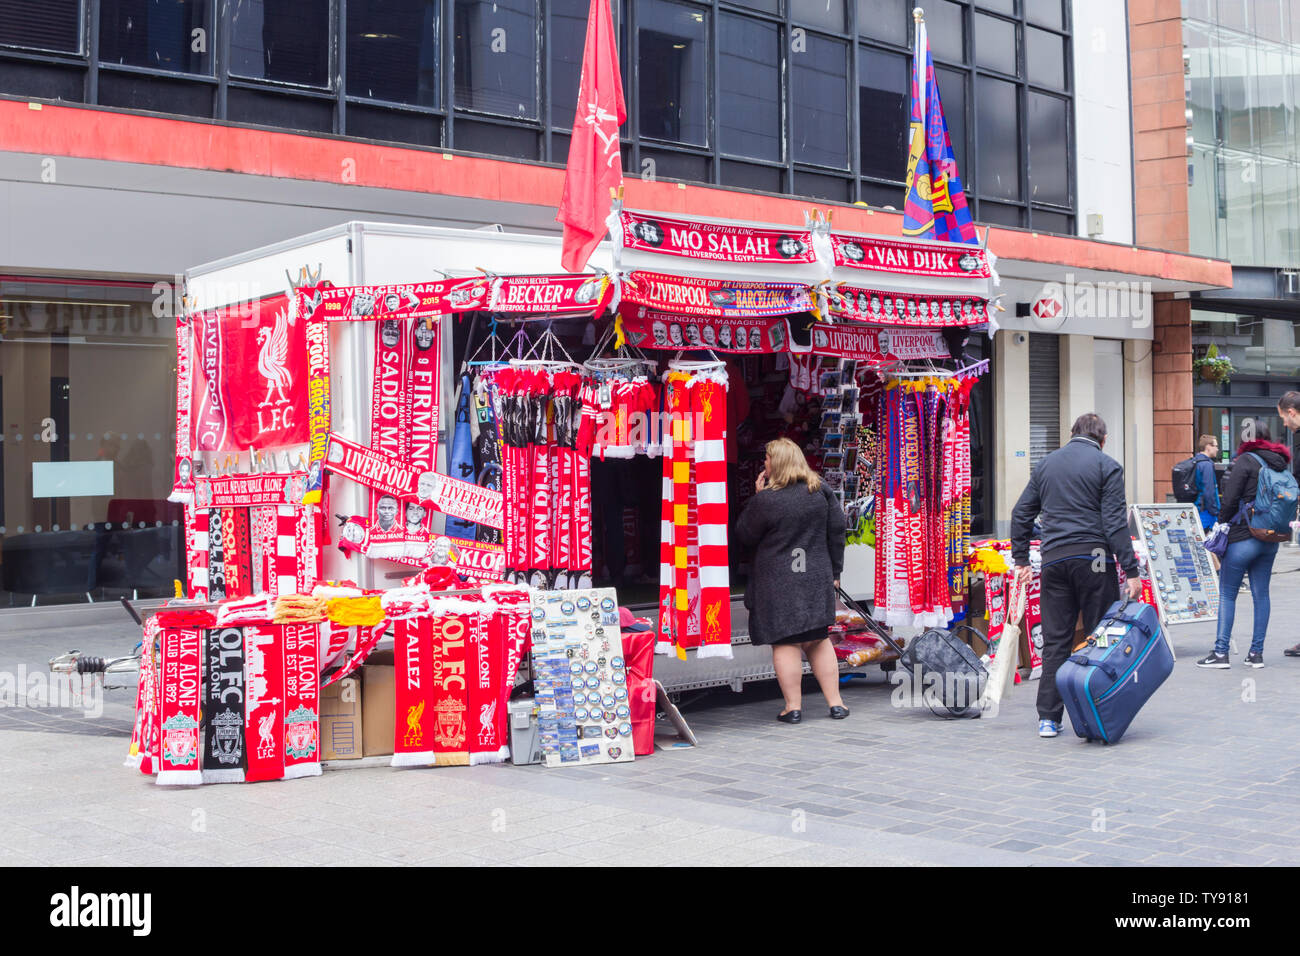 Liverpool Football Club supporter scarves  for sale on a mobile market stall on Whitechapel near its junction with Church Street. Stock Photo